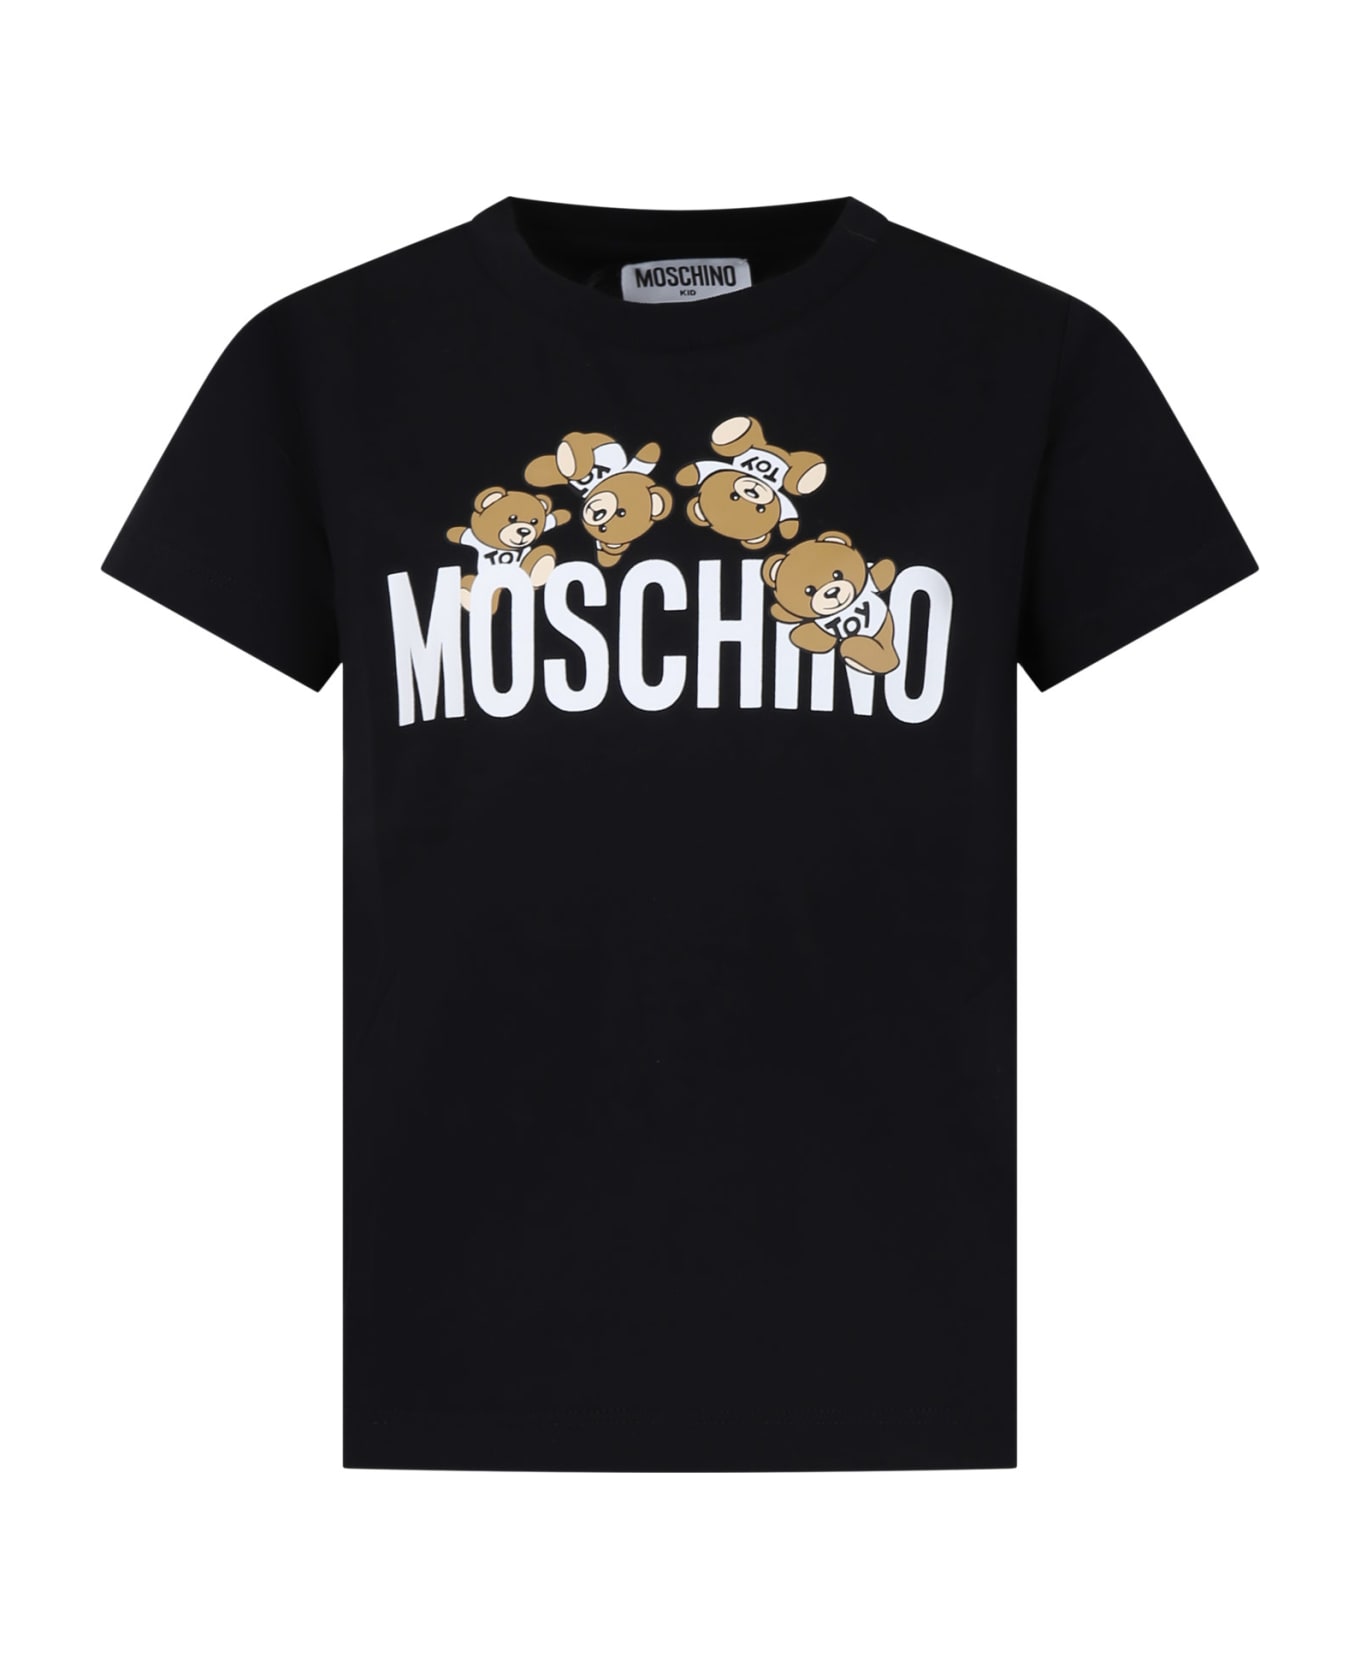 Moschino Black T-shirt For Kids With czapka And Teddy Bear - Nero